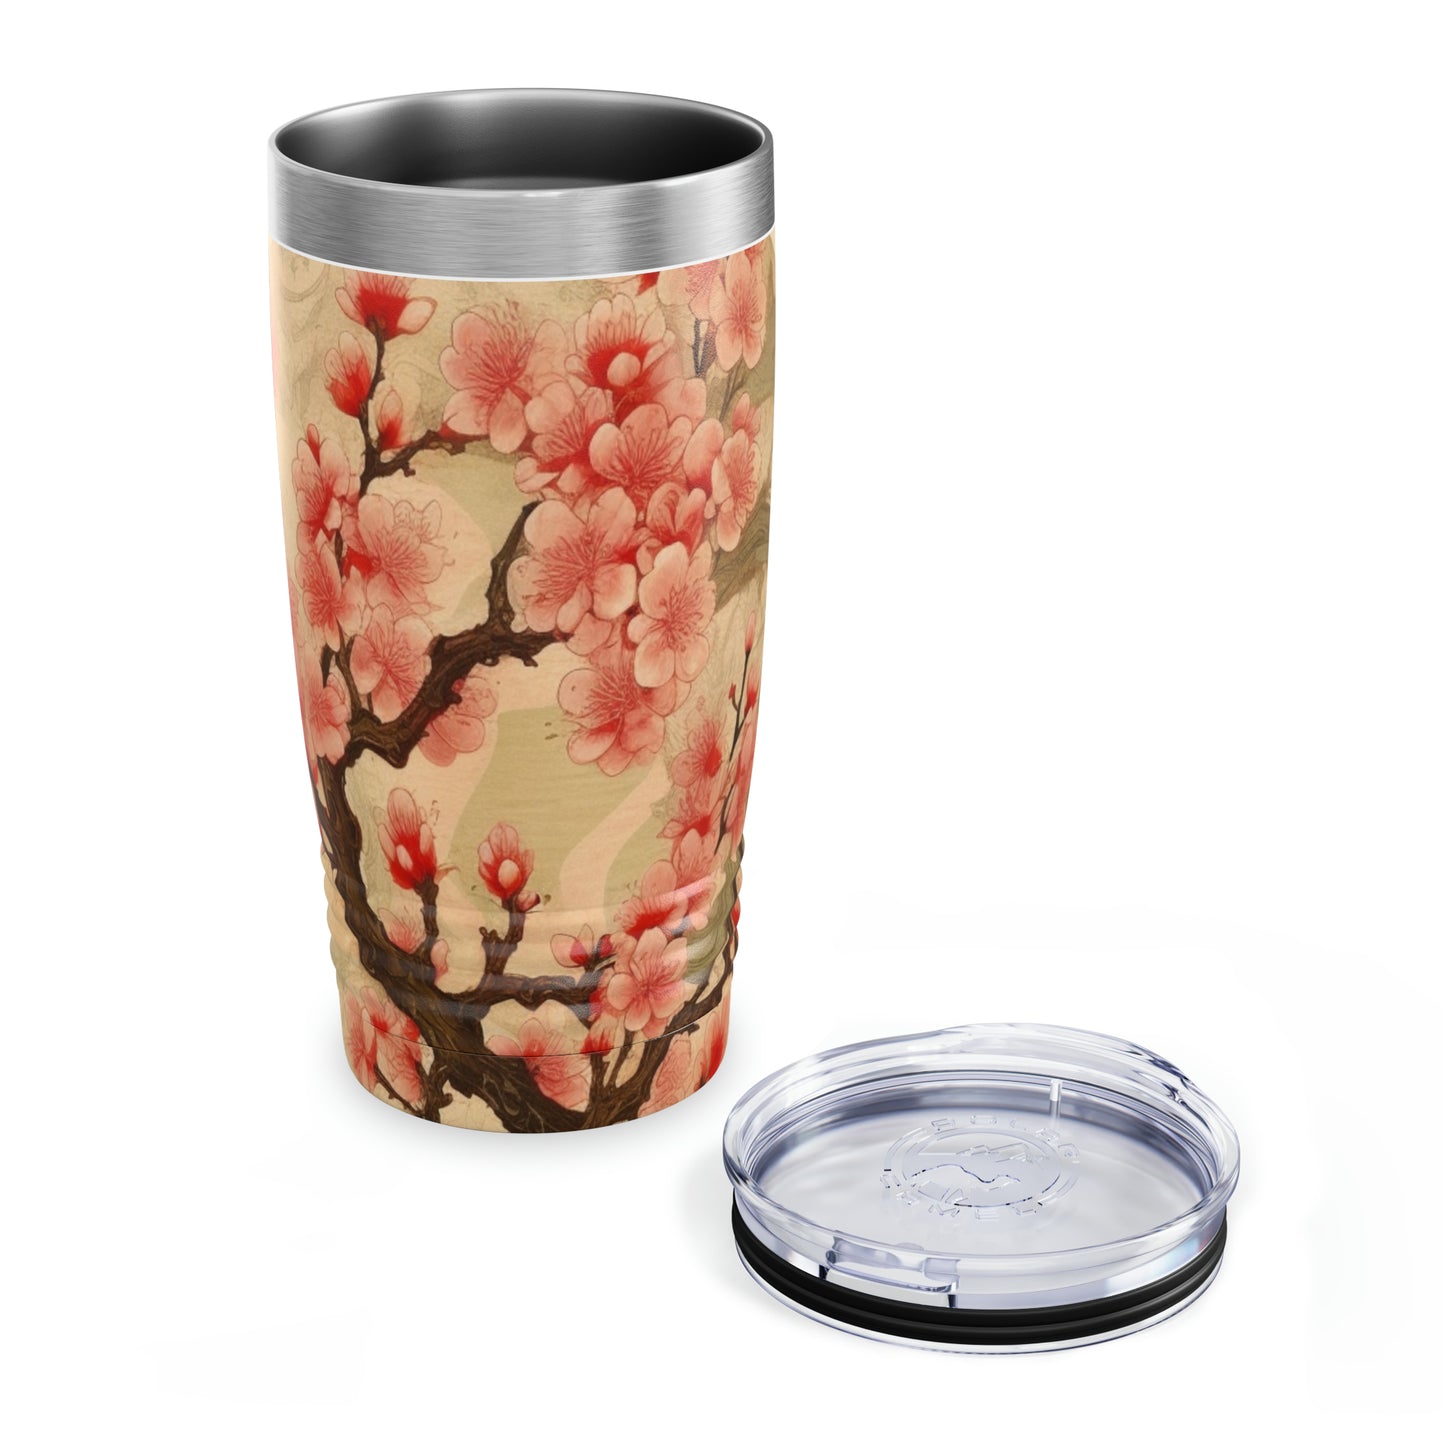 Whimsical Blossom Dreams: Ringneck Tumbler with Delightful Flower Drawings and Cherry Blossoms